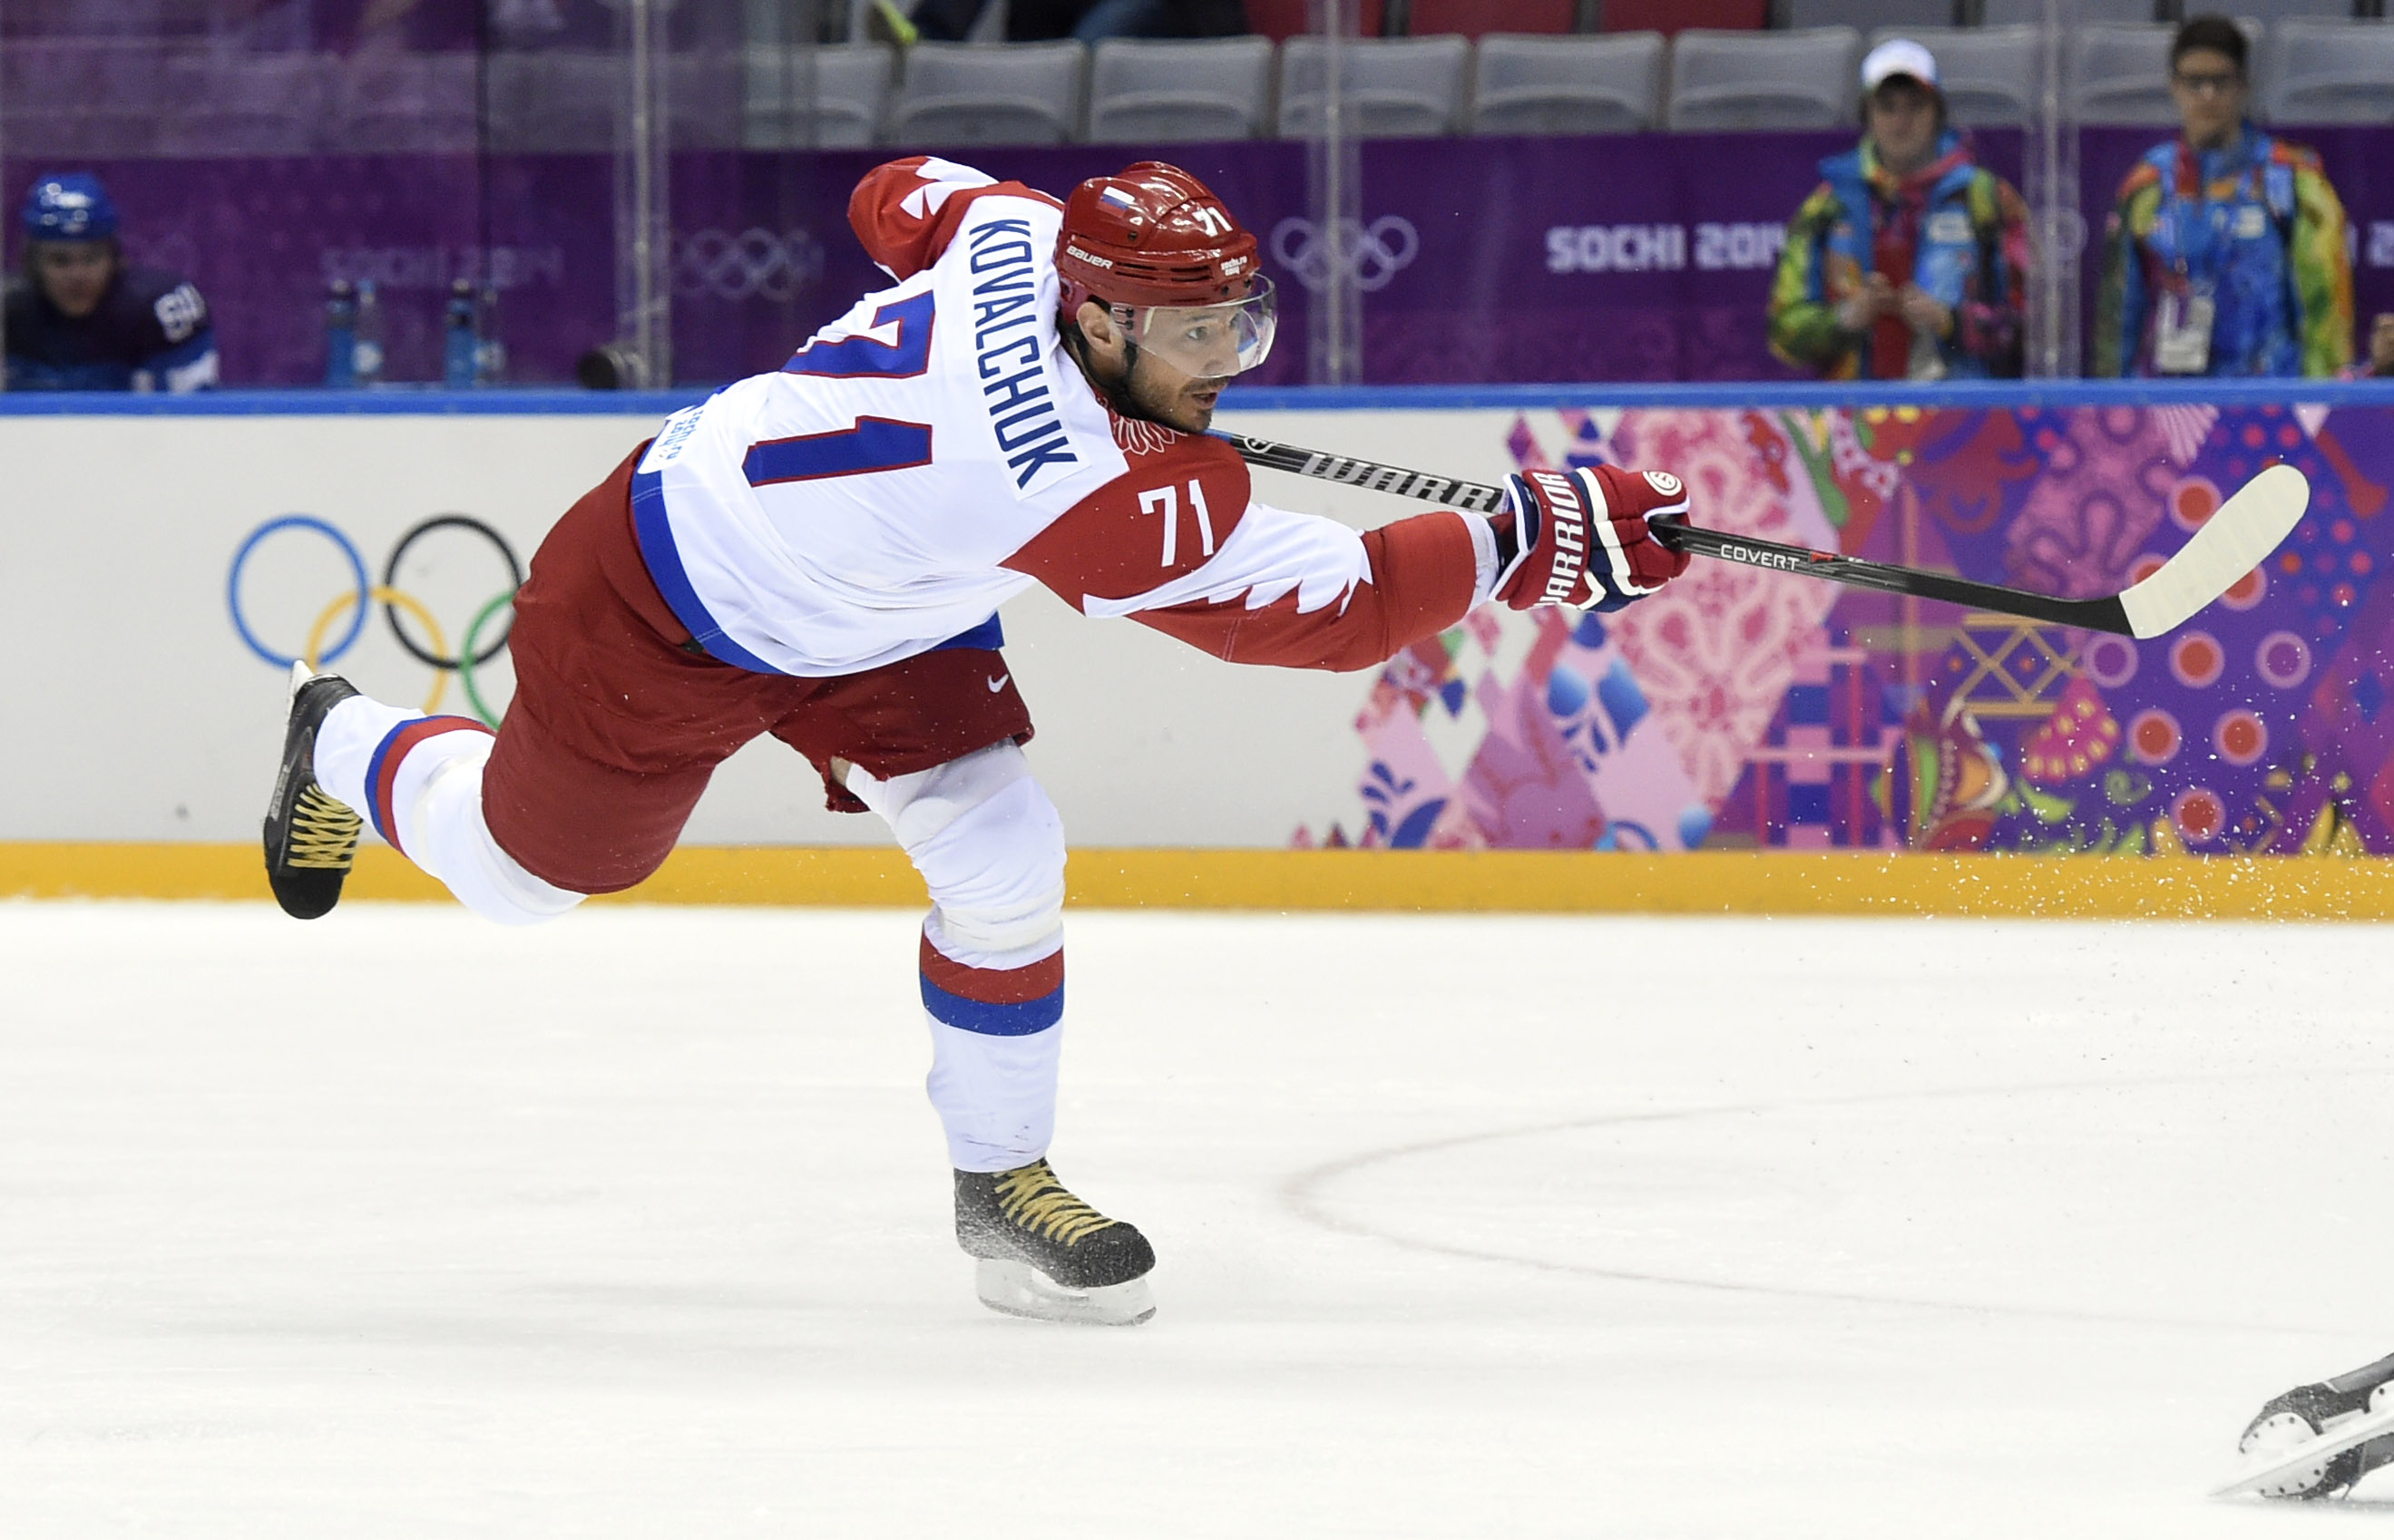 A grueling day for Ilya Kovalchuk without even playing a game 